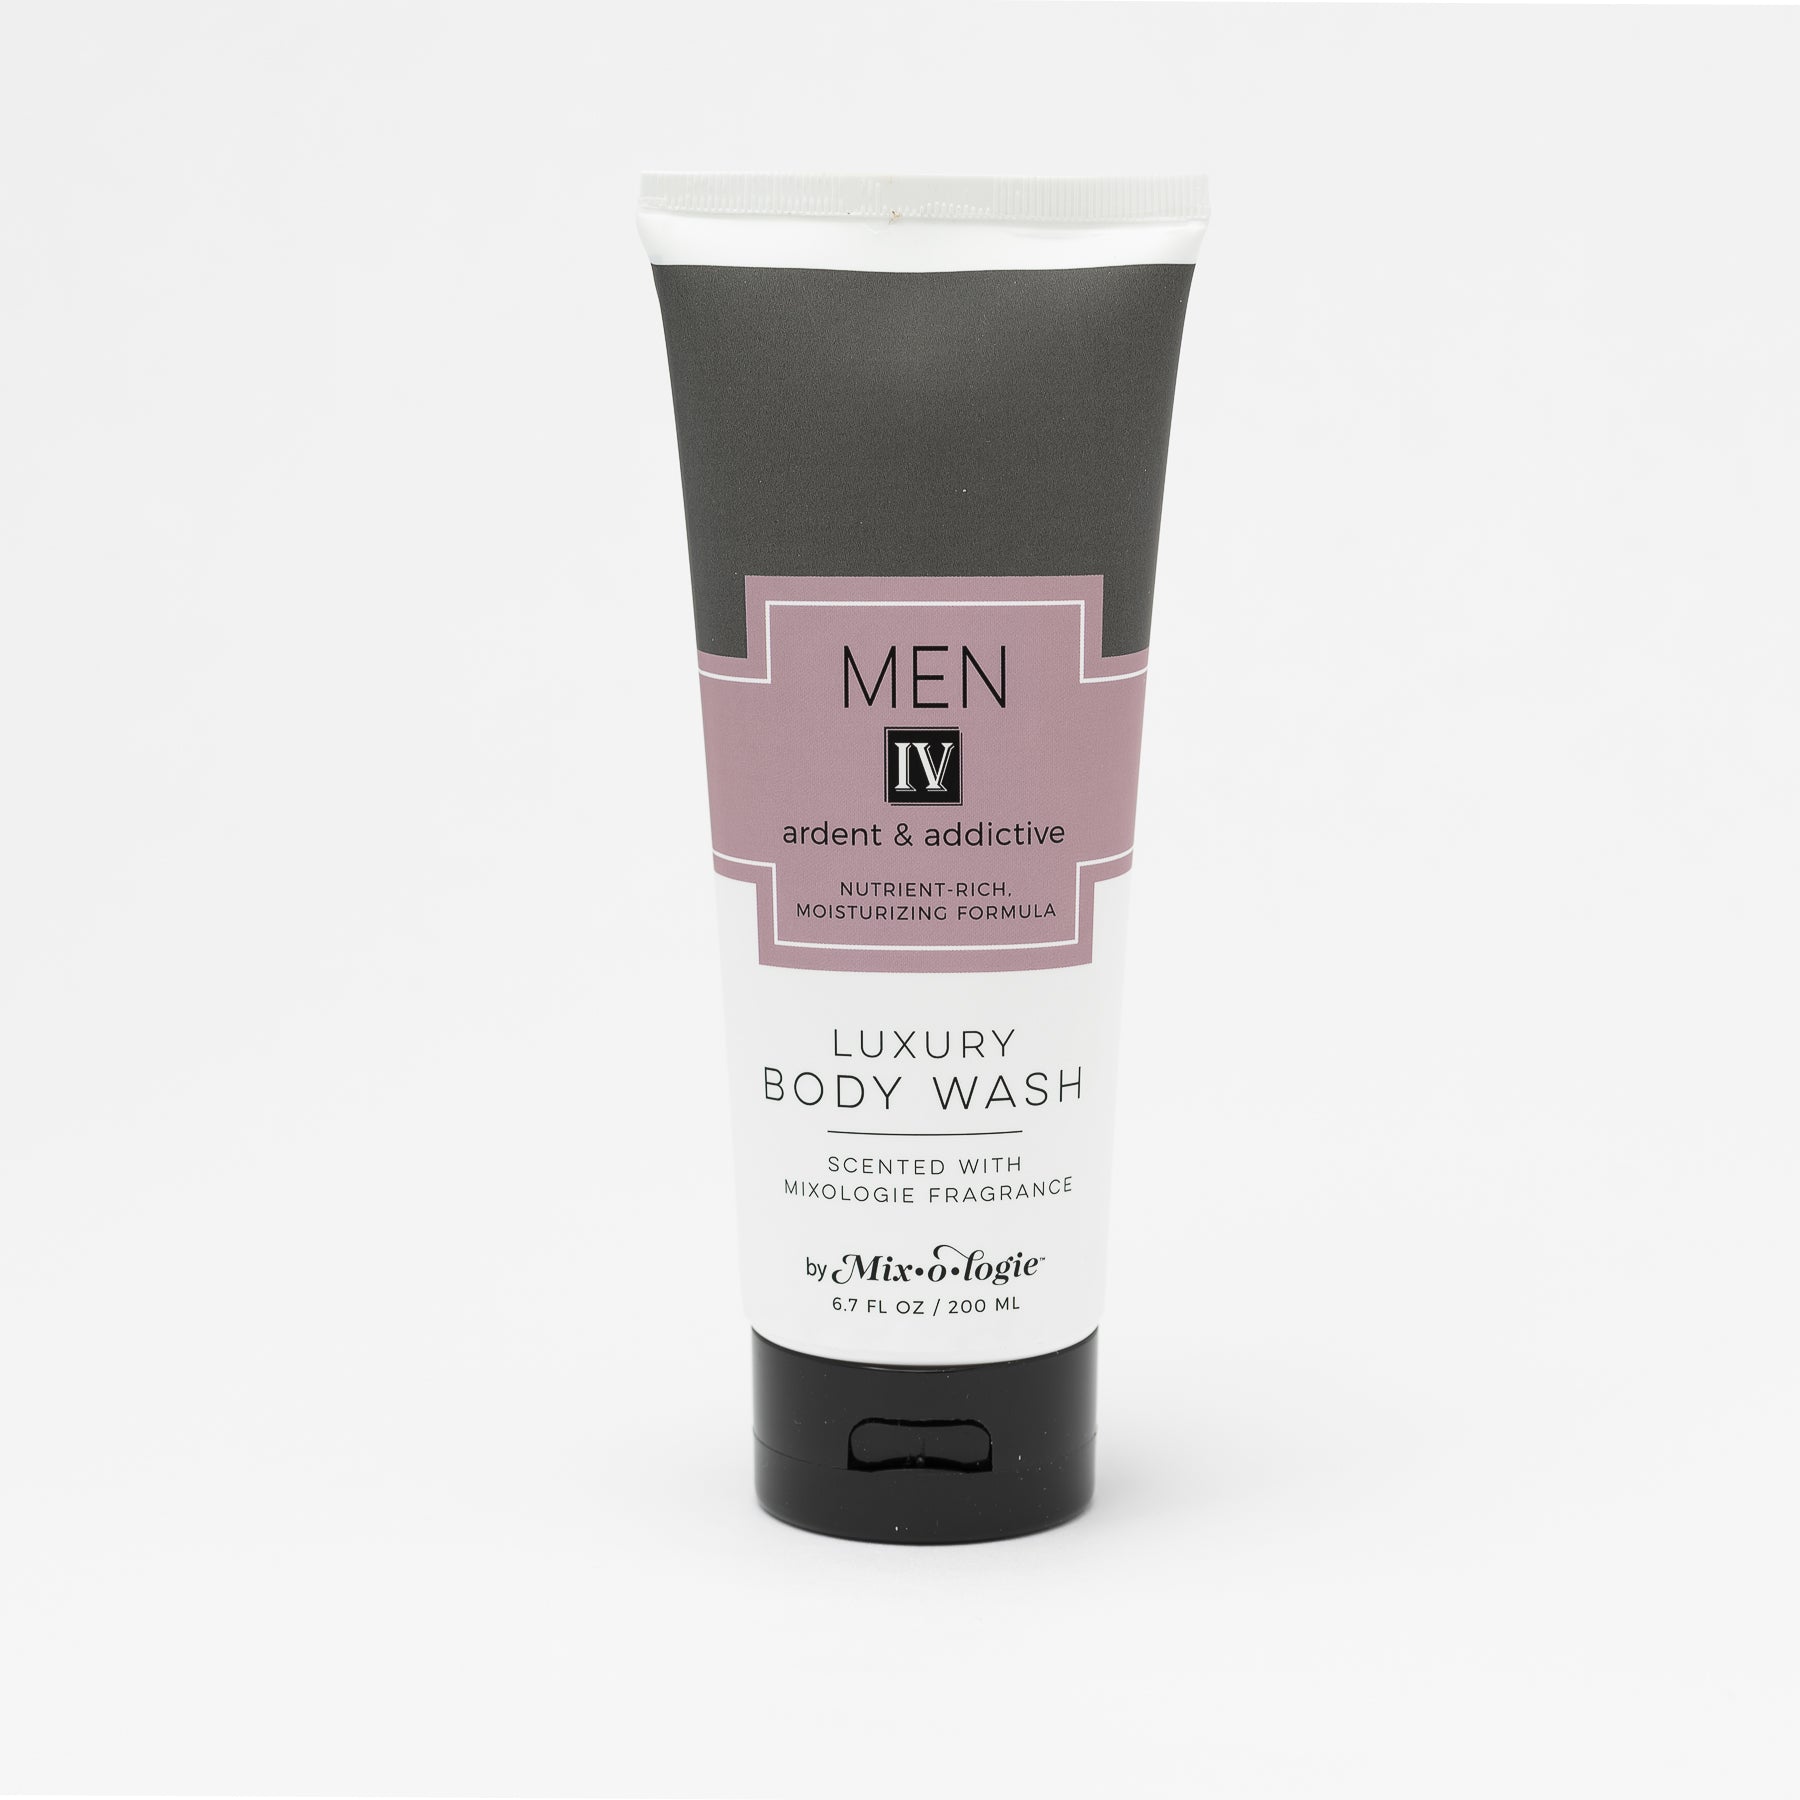 Luxury Body Wash in Men IV (Ardent & Addictive) in grey color package with salmon colored label in white background.